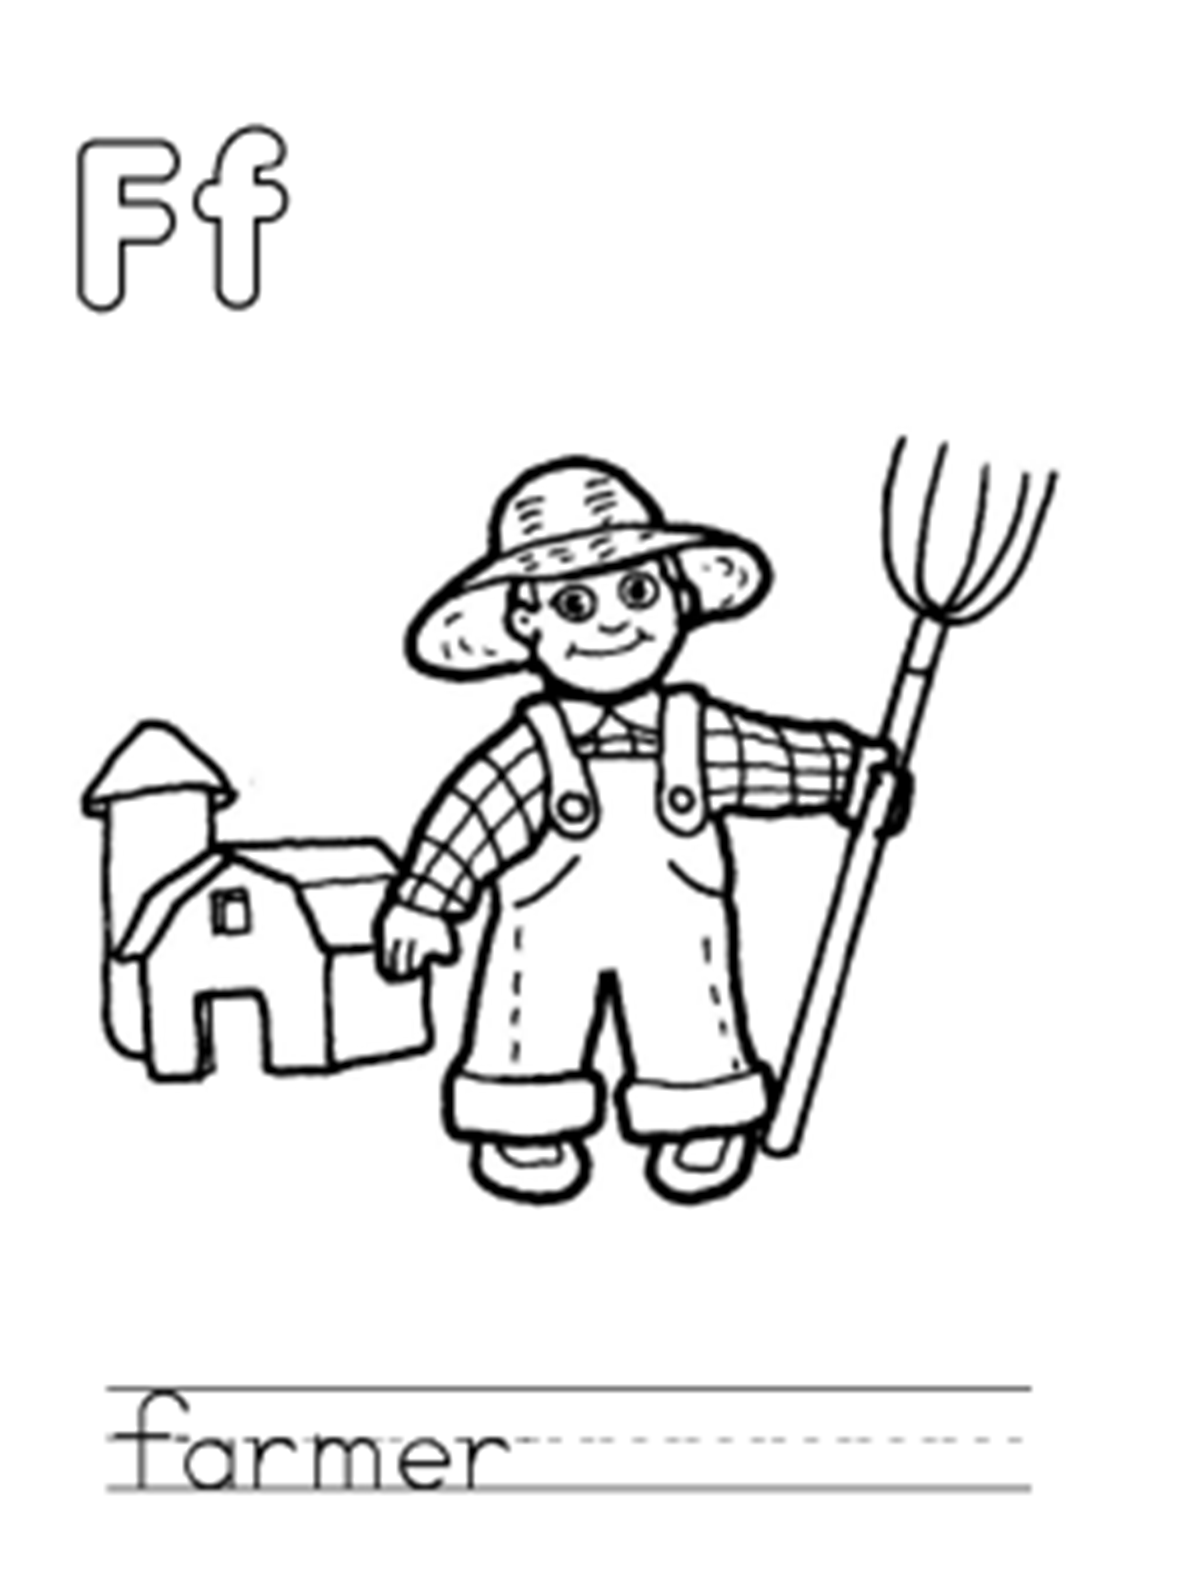 Farmer Free Alphabet Coloring Pages | Alphabet Coloring pages of ...